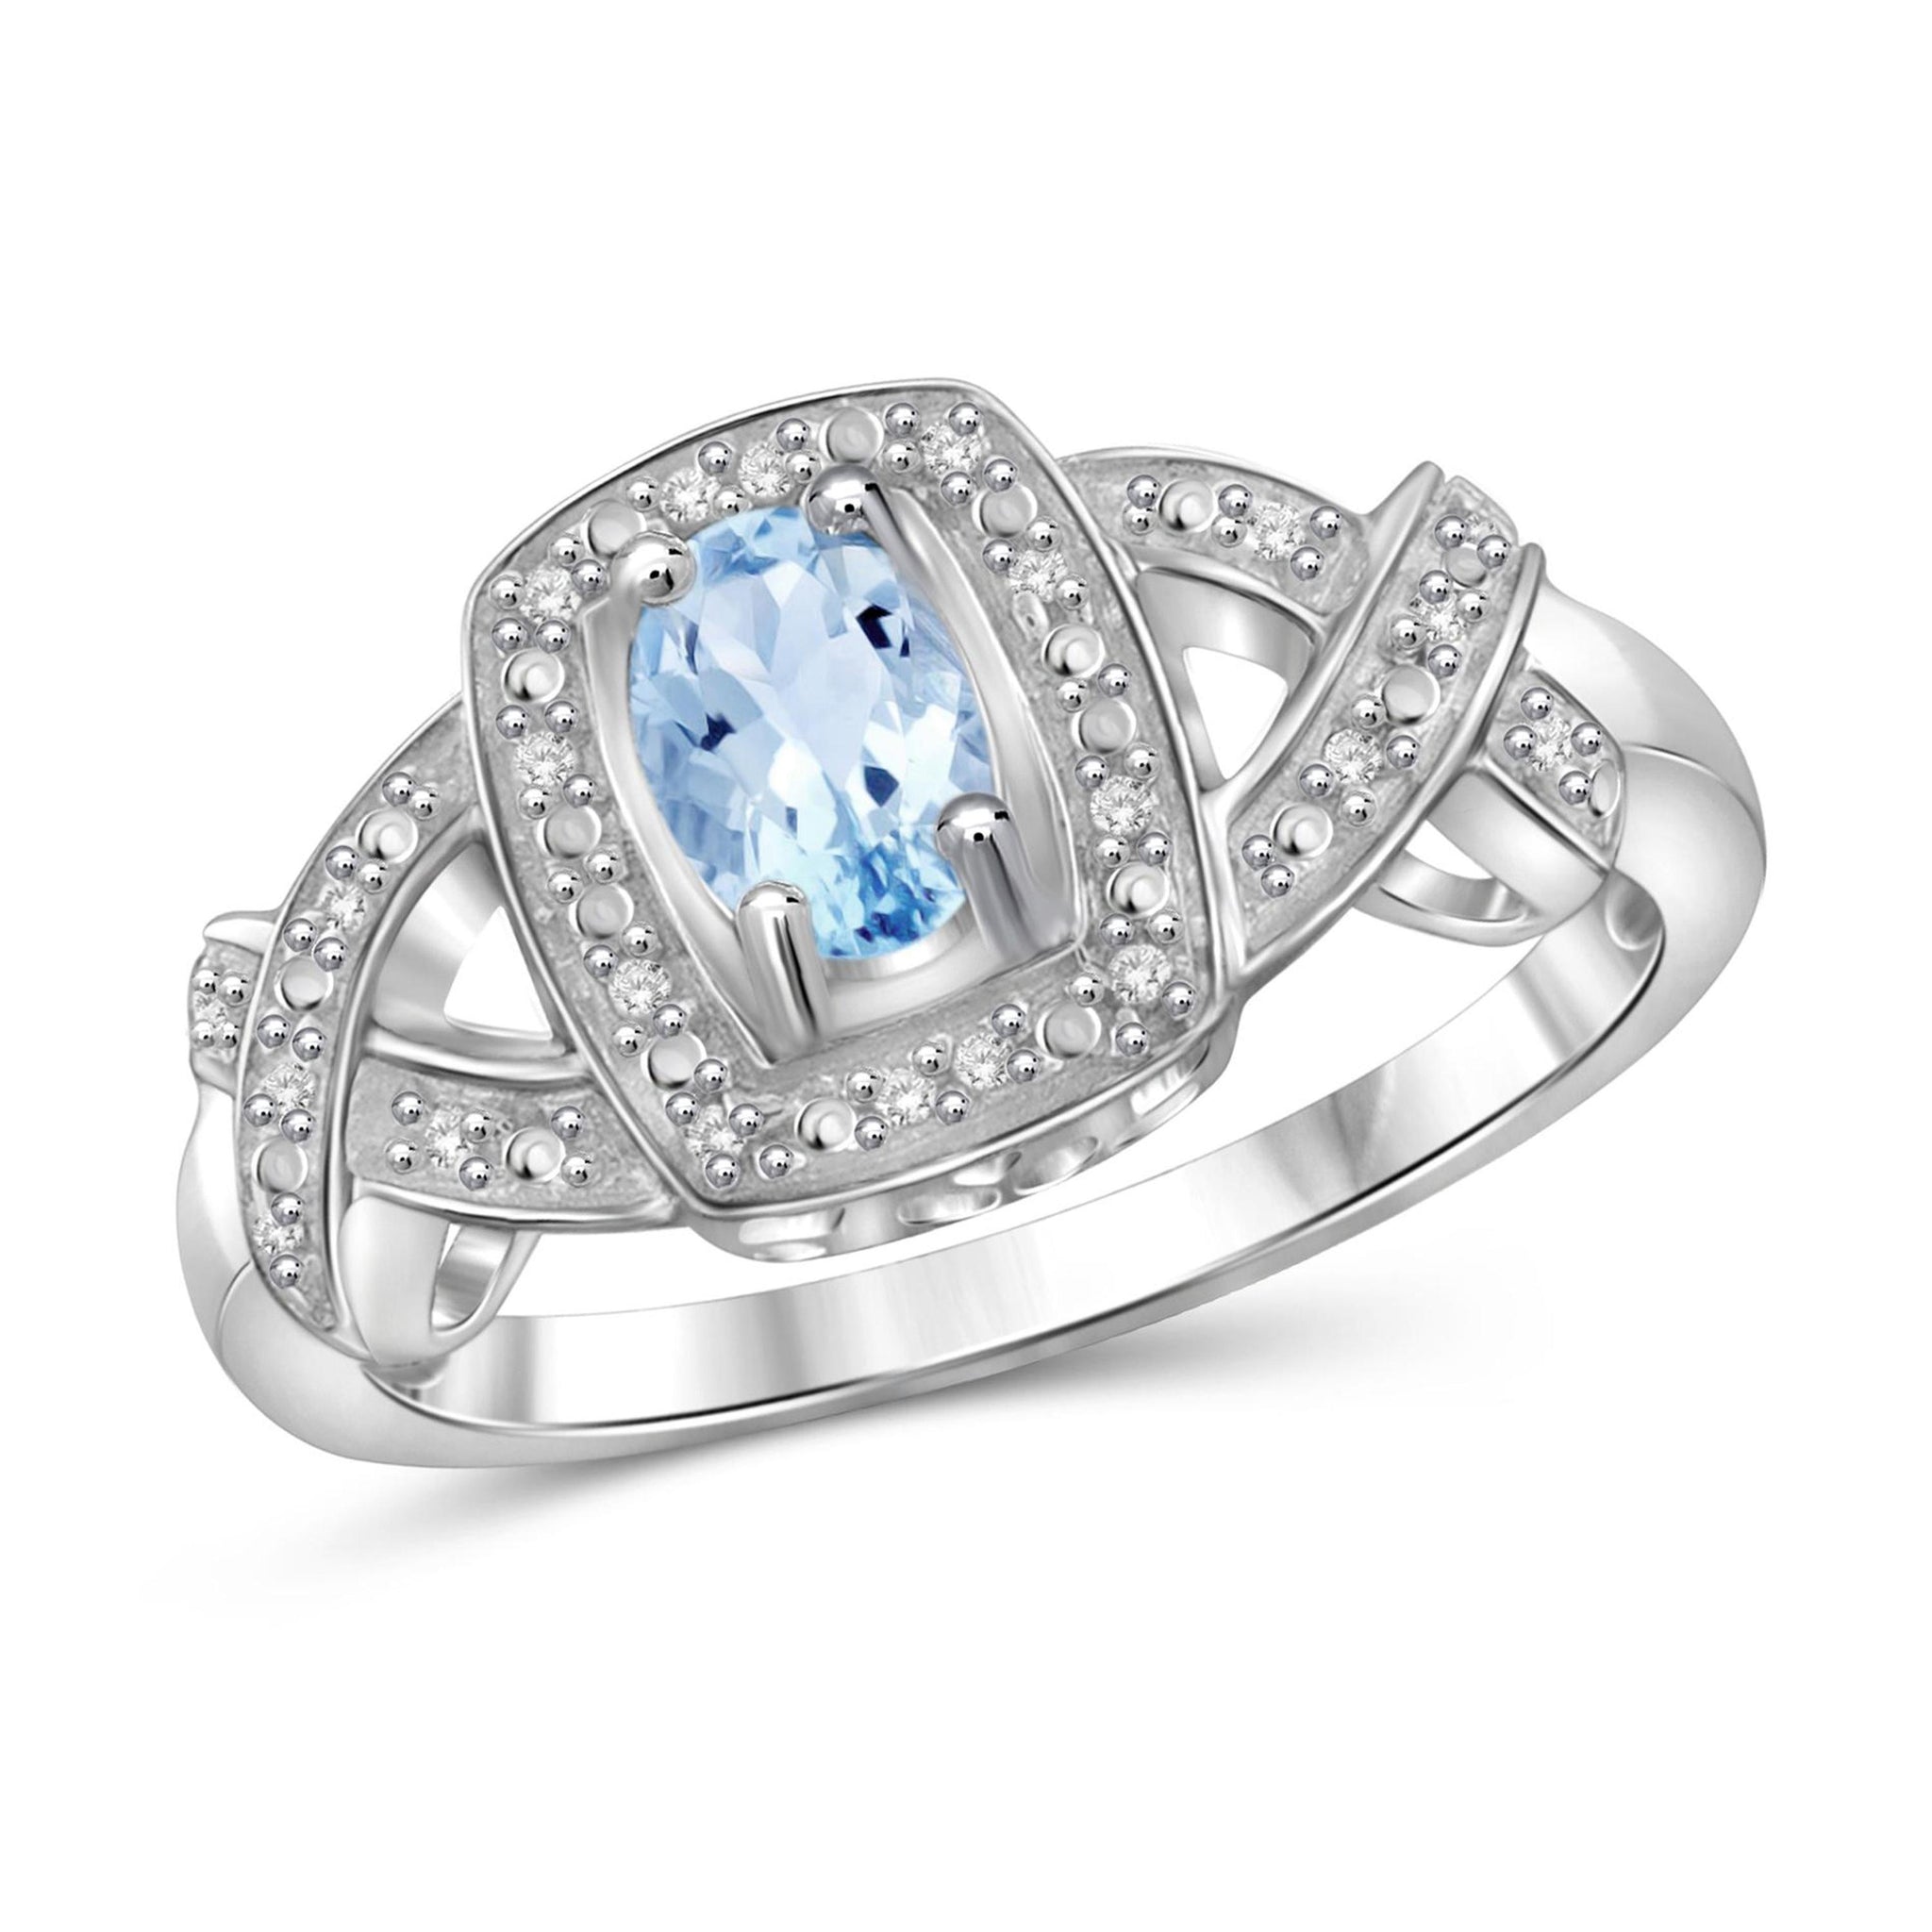 JewelonFire 1/2 Carat T.G.W. Sky Blue Topaz And 1/20 Carat T.W. White Diamond Sterling Silver Ring - Assorted Colors